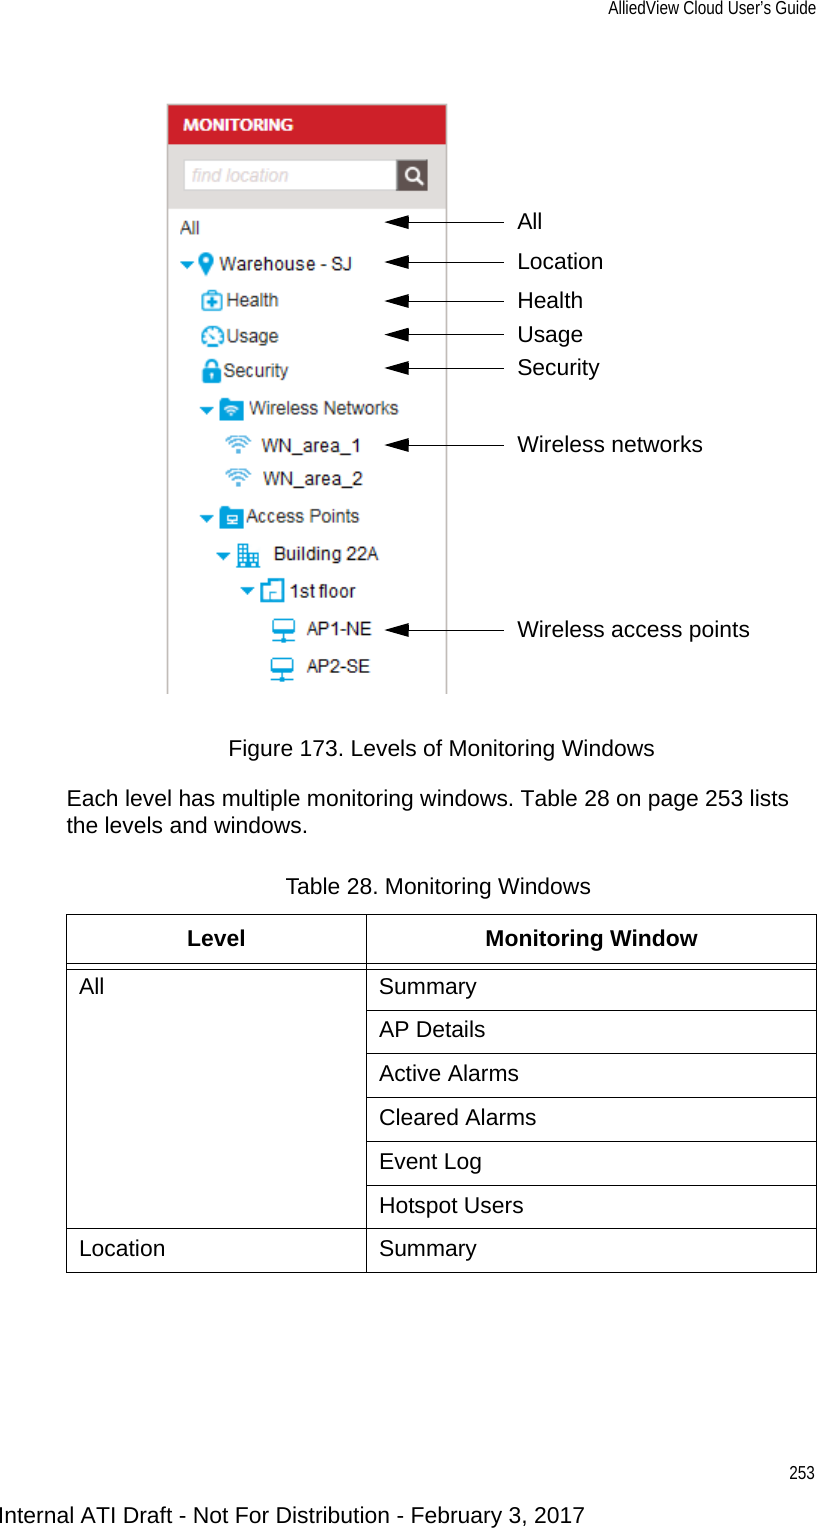 AlliedView Cloud User’s Guide253Figure 173. Levels of Monitoring WindowsEach level has multiple monitoring windows. Table 28 on page 253 lists the levels and windows.Table 28. Monitoring WindowsLevel Monitoring WindowAll SummaryAP DetailsActive AlarmsCleared AlarmsEvent LogHotspot UsersLocation SummaryWireless access pointsWireless networksSecurityUsageHealthLocationAllInternal ATI Draft - Not For Distribution - February 3, 2017